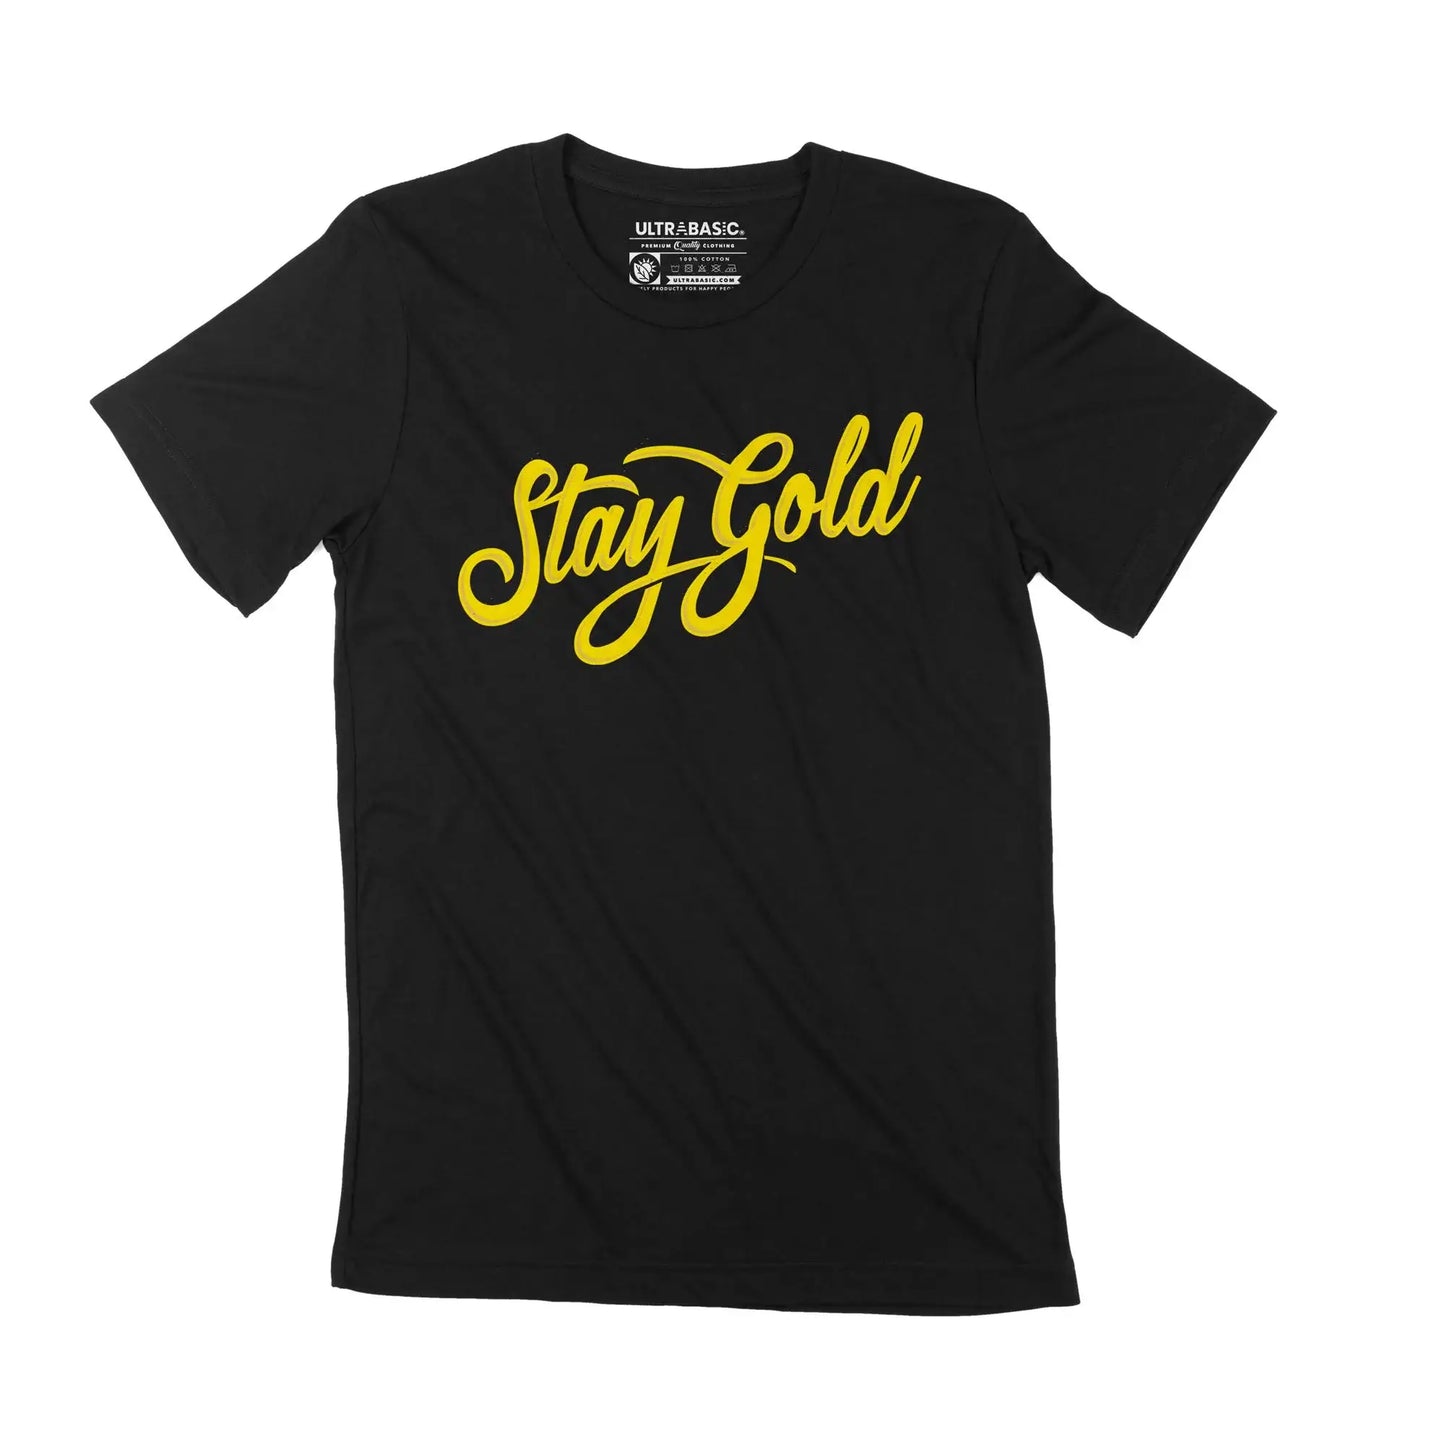 Men's Graphic T-Shirt Stay Goldphrase Eco-Friendly Limited Edition Short Sleeve Tee-Shirt Vintage Birthday Gift Novelty